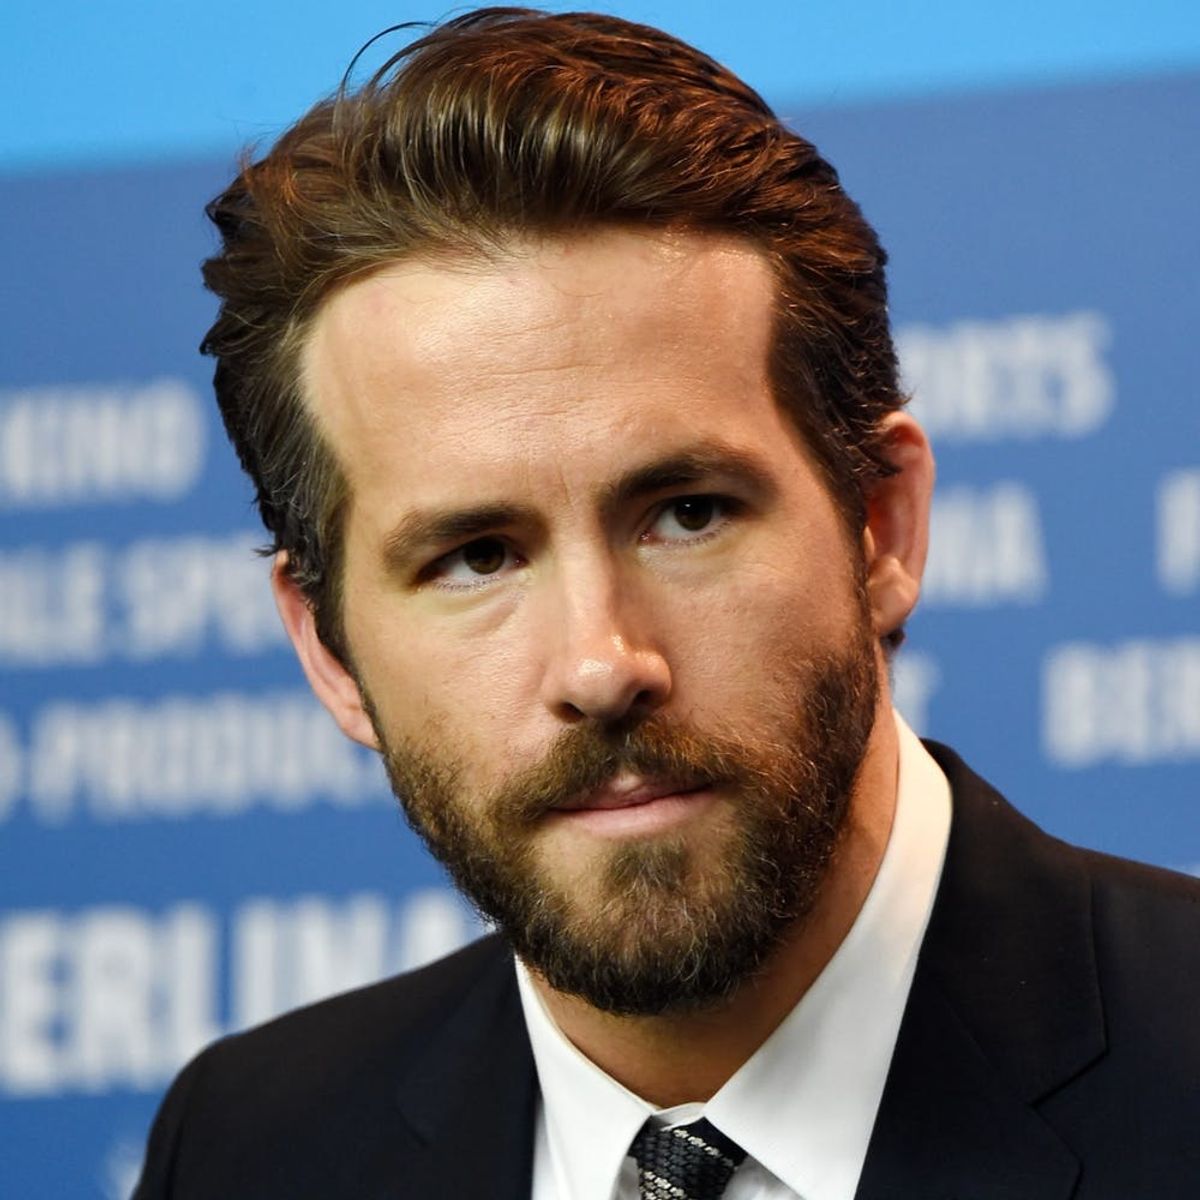 Ryan Reynolds Mourns Deadpool 2 Stunt Driver’s Tragic Death in Motorcycle Accident